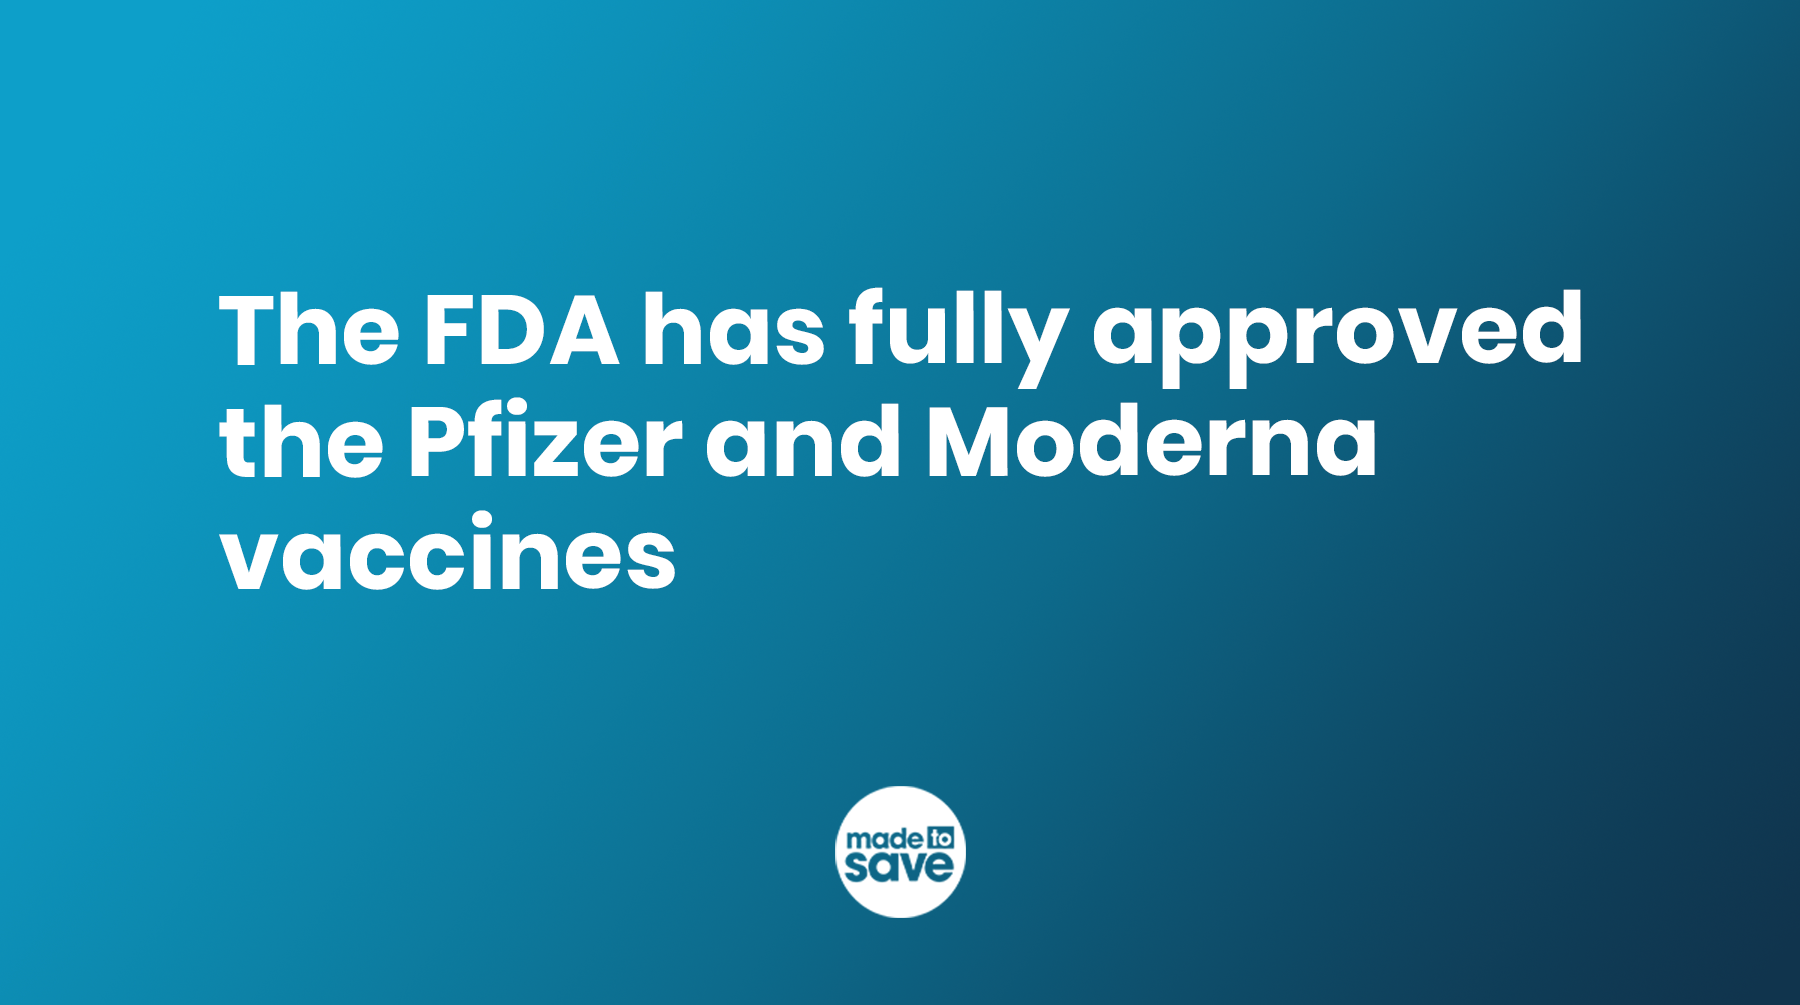 Graphic with blue background. In white text it reads, "The FDA has fully approved the Pfizer and Moderna vaccines." The Made to Save logo is centered in white.